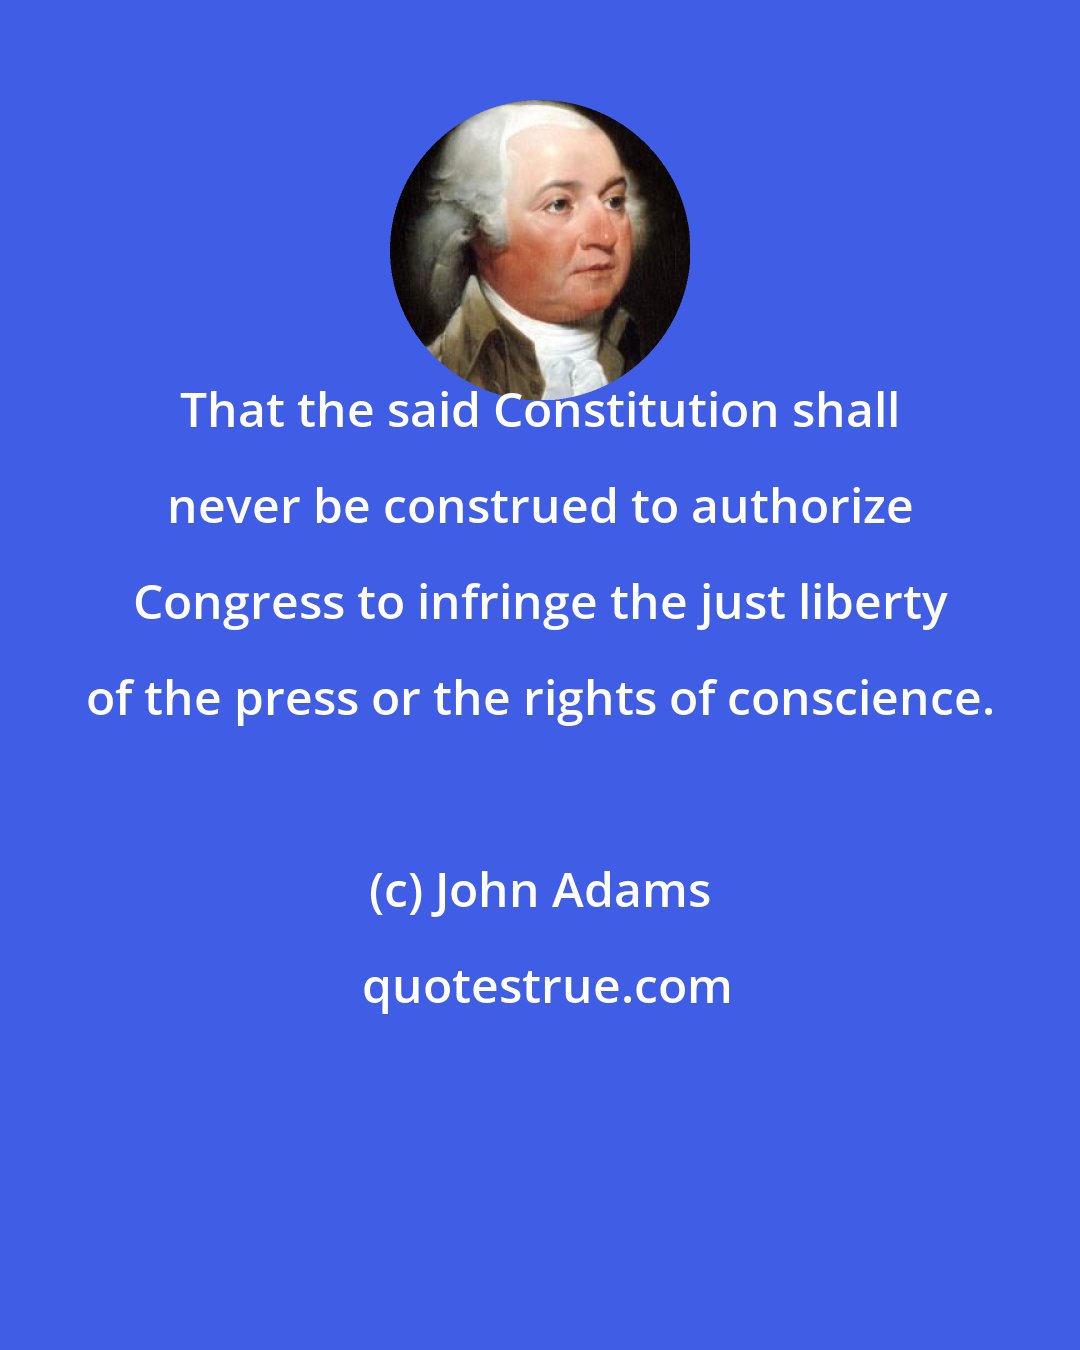 John Adams: That the said Constitution shall never be construed to authorize Congress to infringe the just liberty of the press or the rights of conscience.